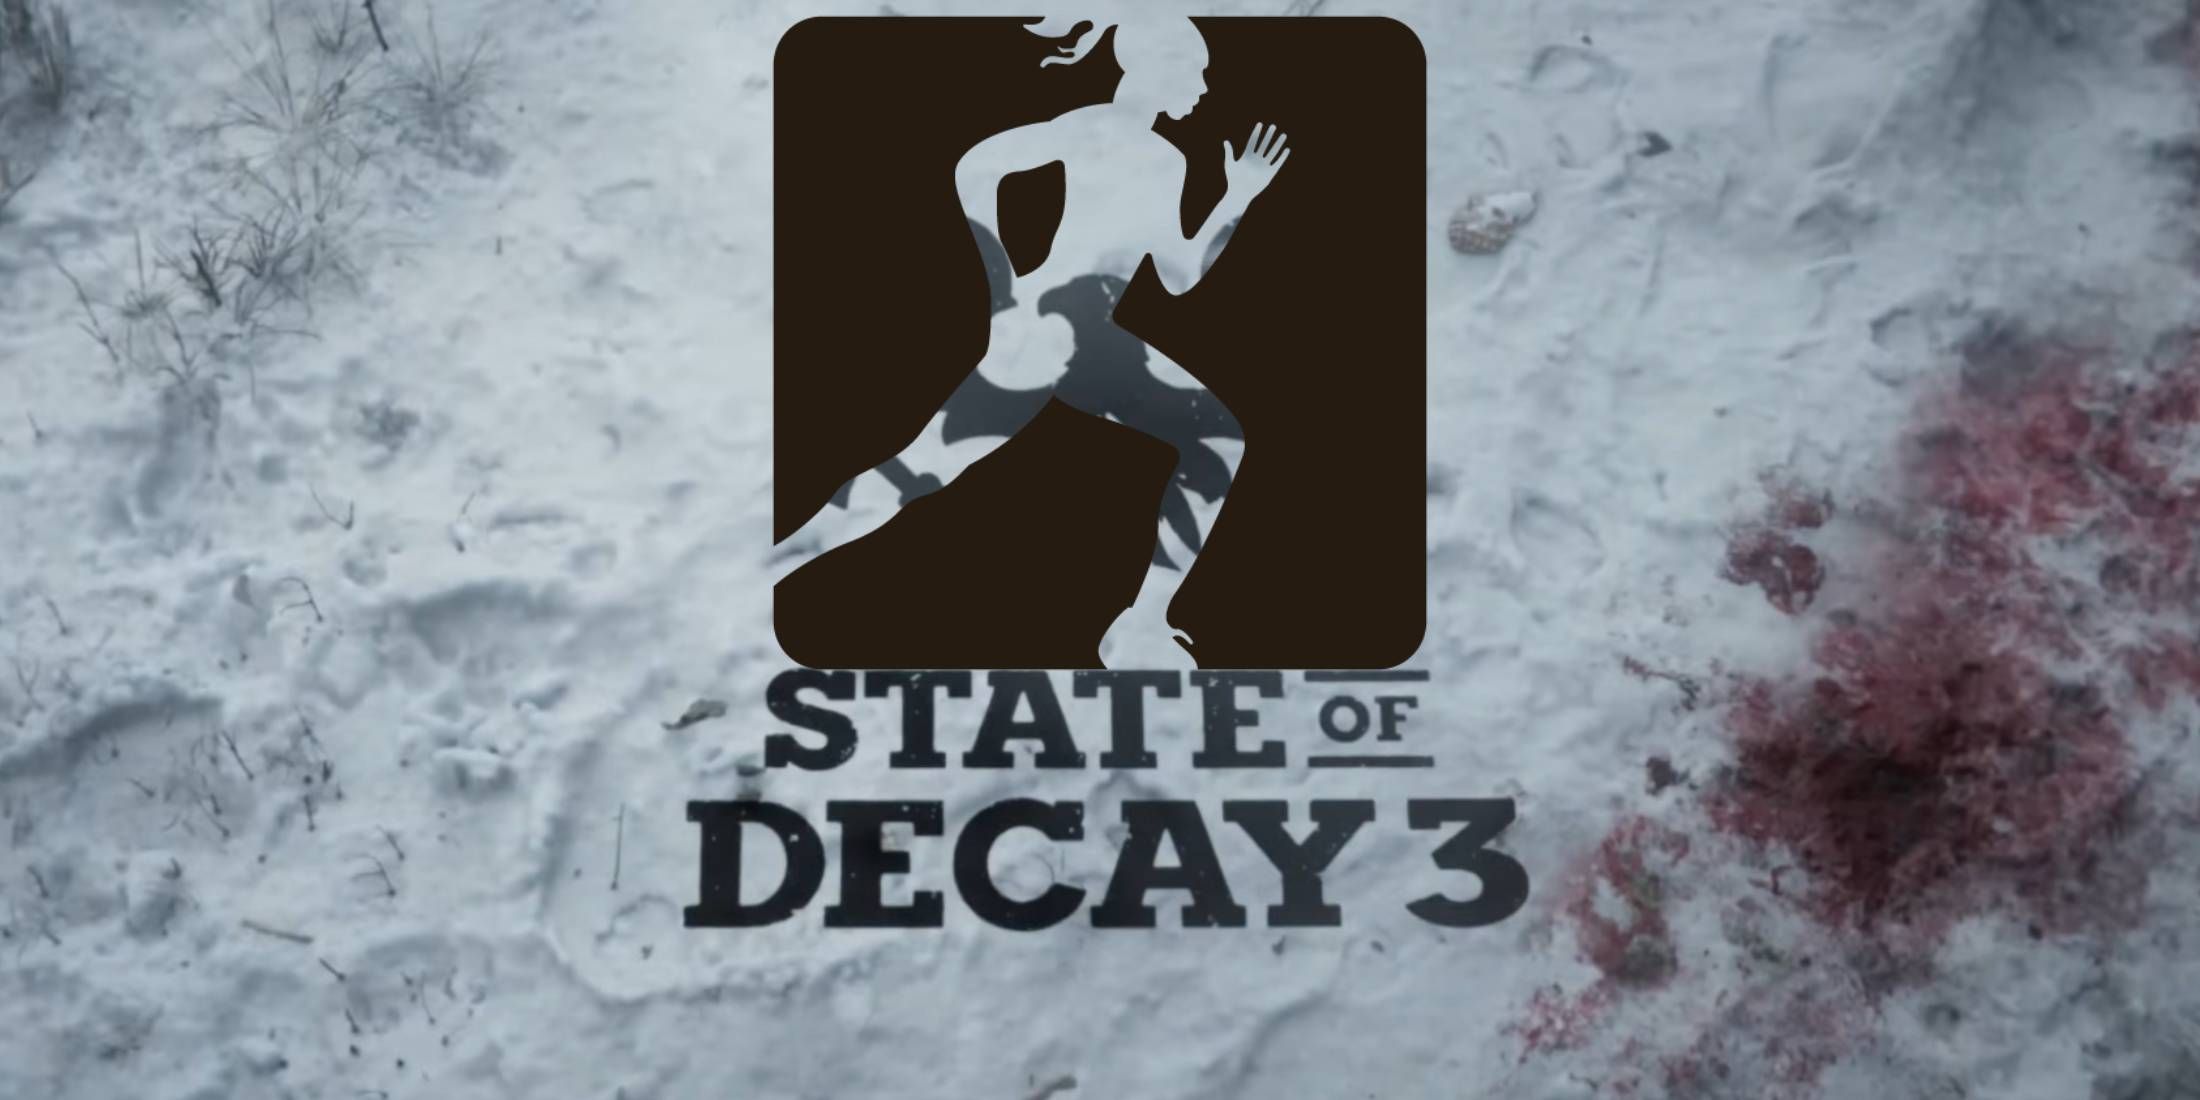 Shot from the State of Decay 3 trailer with the Cardio logo added